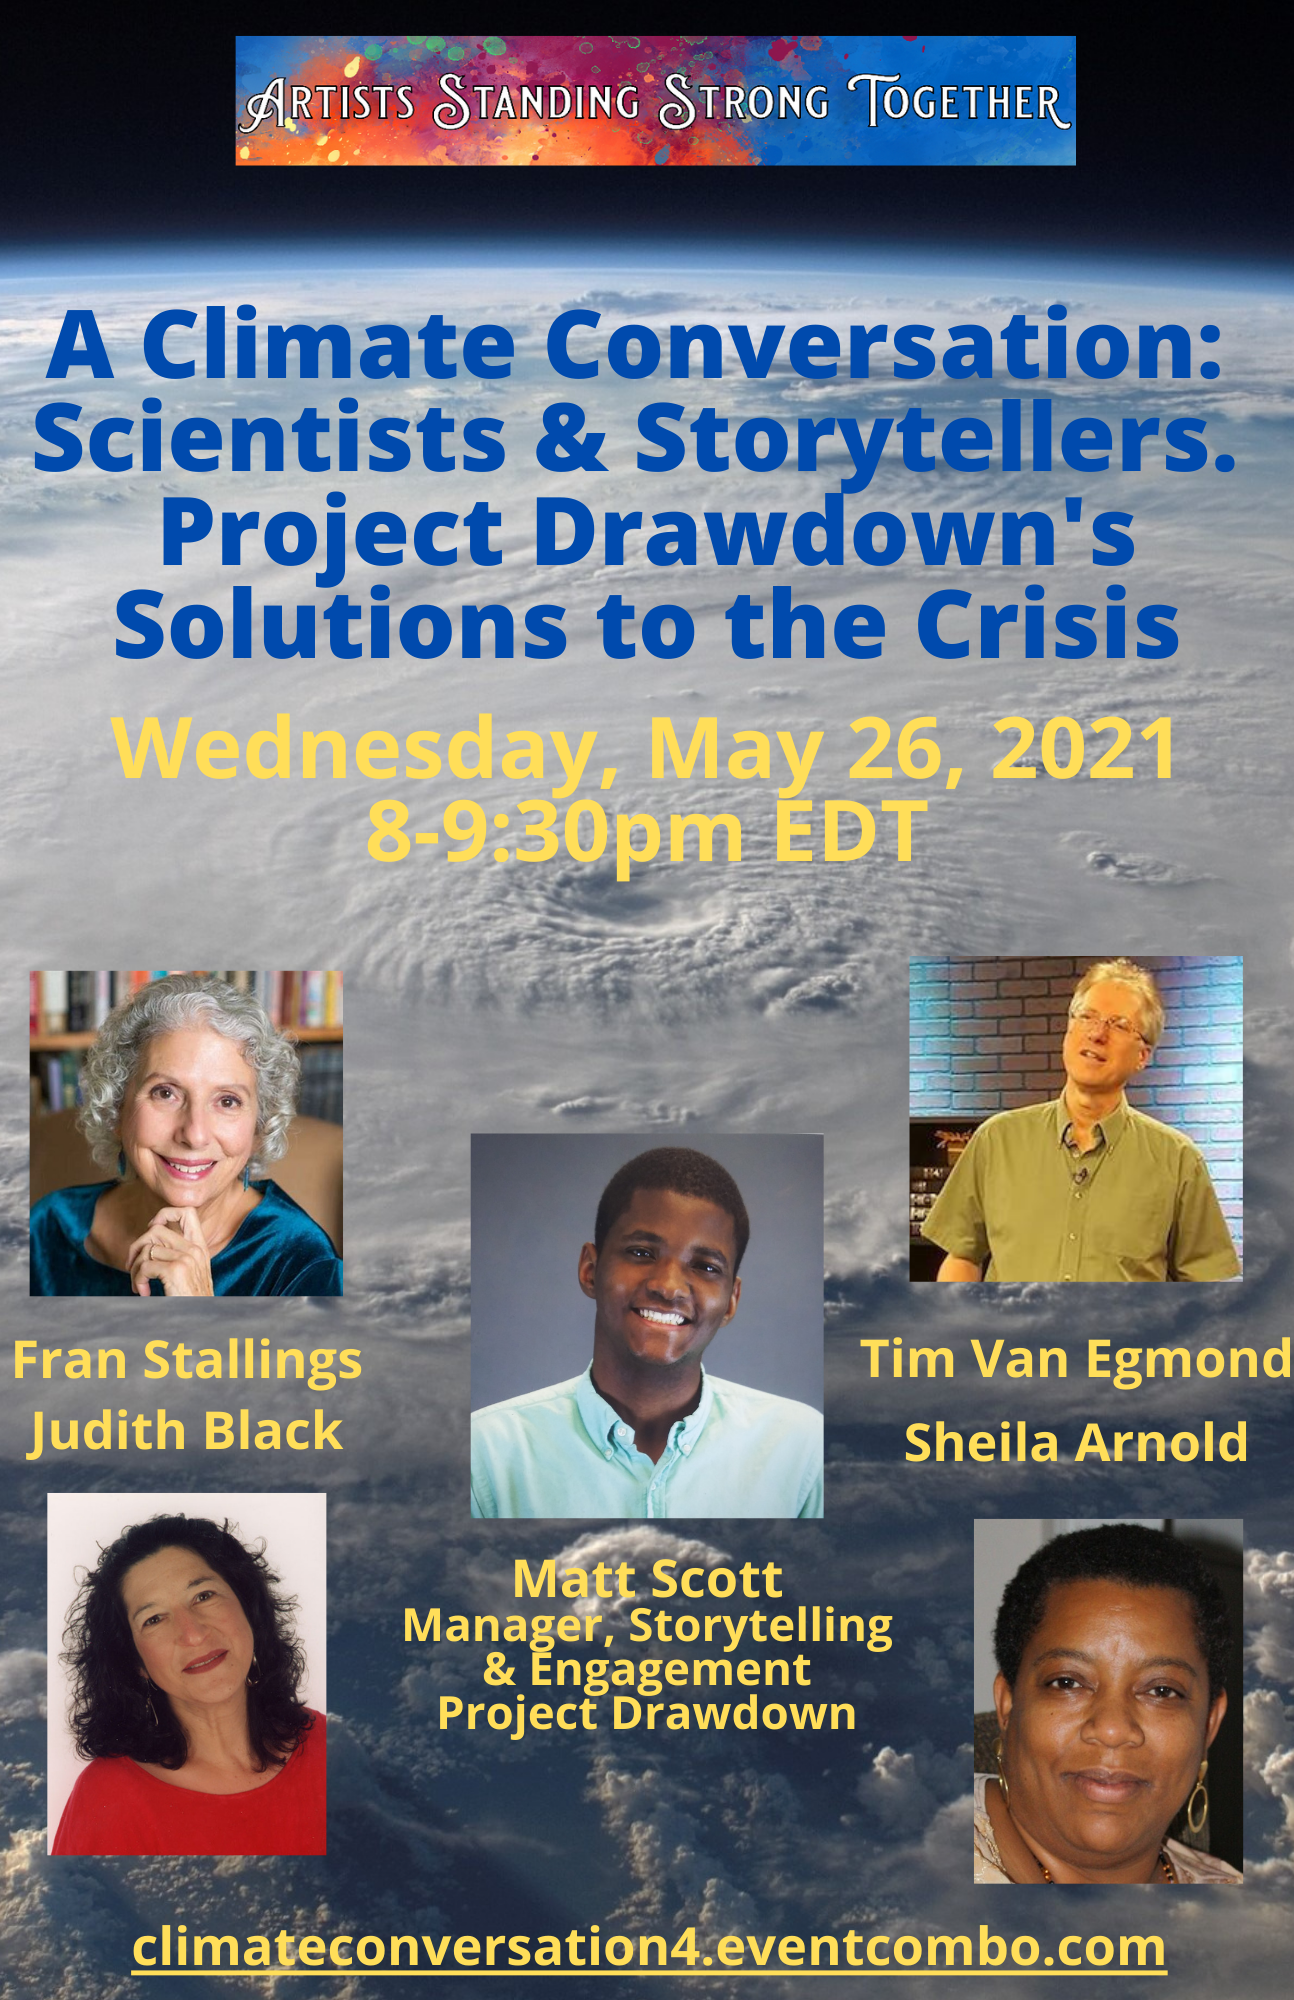 A Climate Conversation: Scientists and Storytellers. 
Project Drawdown's Solutions to the Crisis